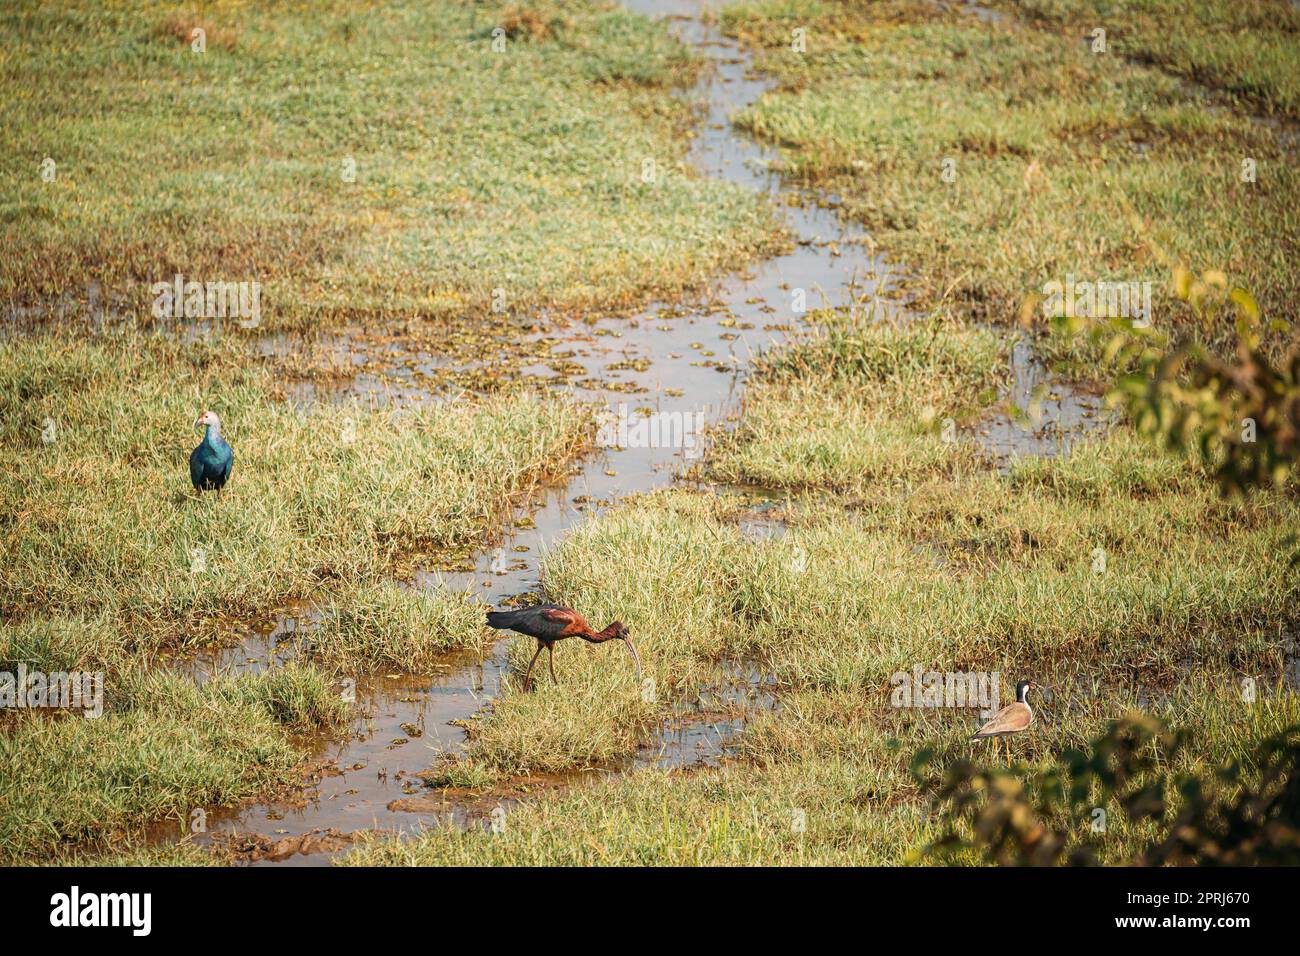 Goa, India. Grey-headed Swamphen, Glossy Ibis And Red-wattled Lapwing In Morning Looking For Food In Swamp. Plegadis Falcinellus Is A Wading Bird In The Ibis Family Threskiornithidae Stock Photo